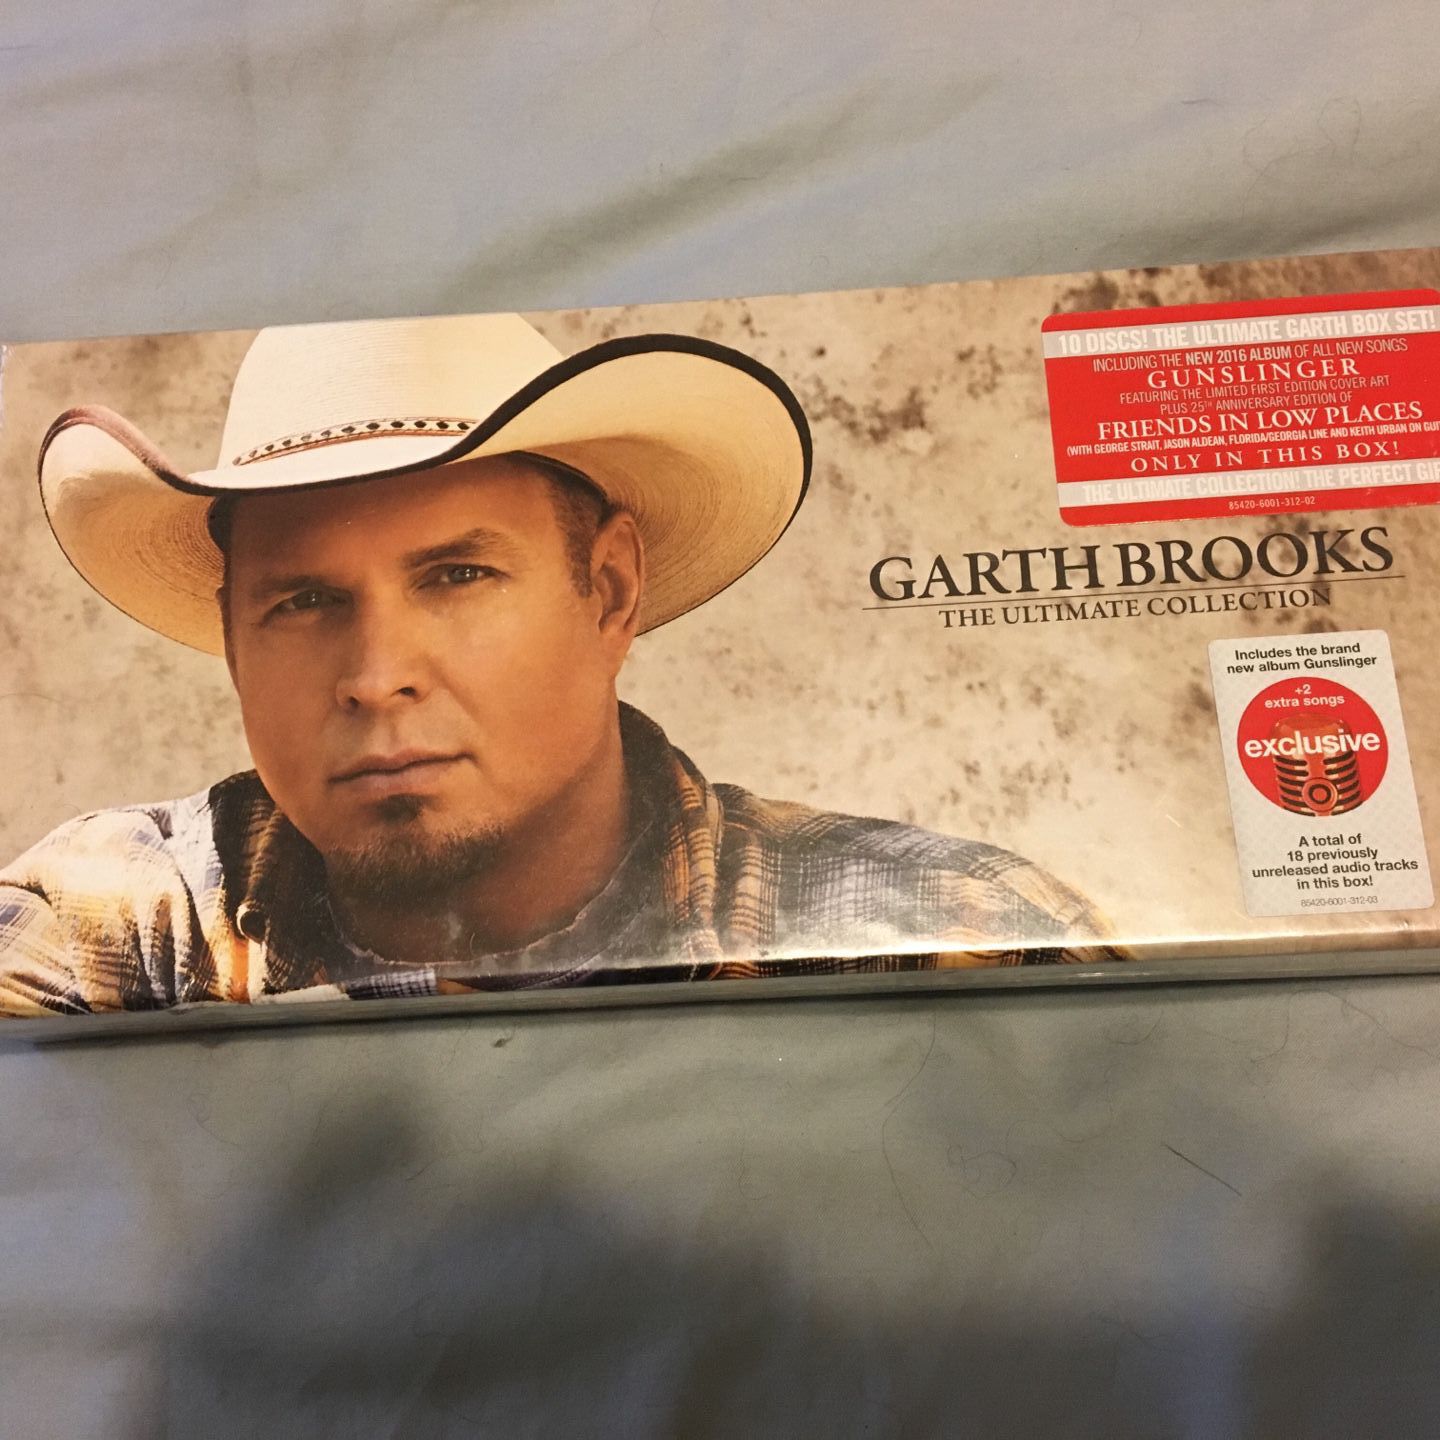 Garth Brooks Ultimate Collection of 10 CDs Brand new sealed box